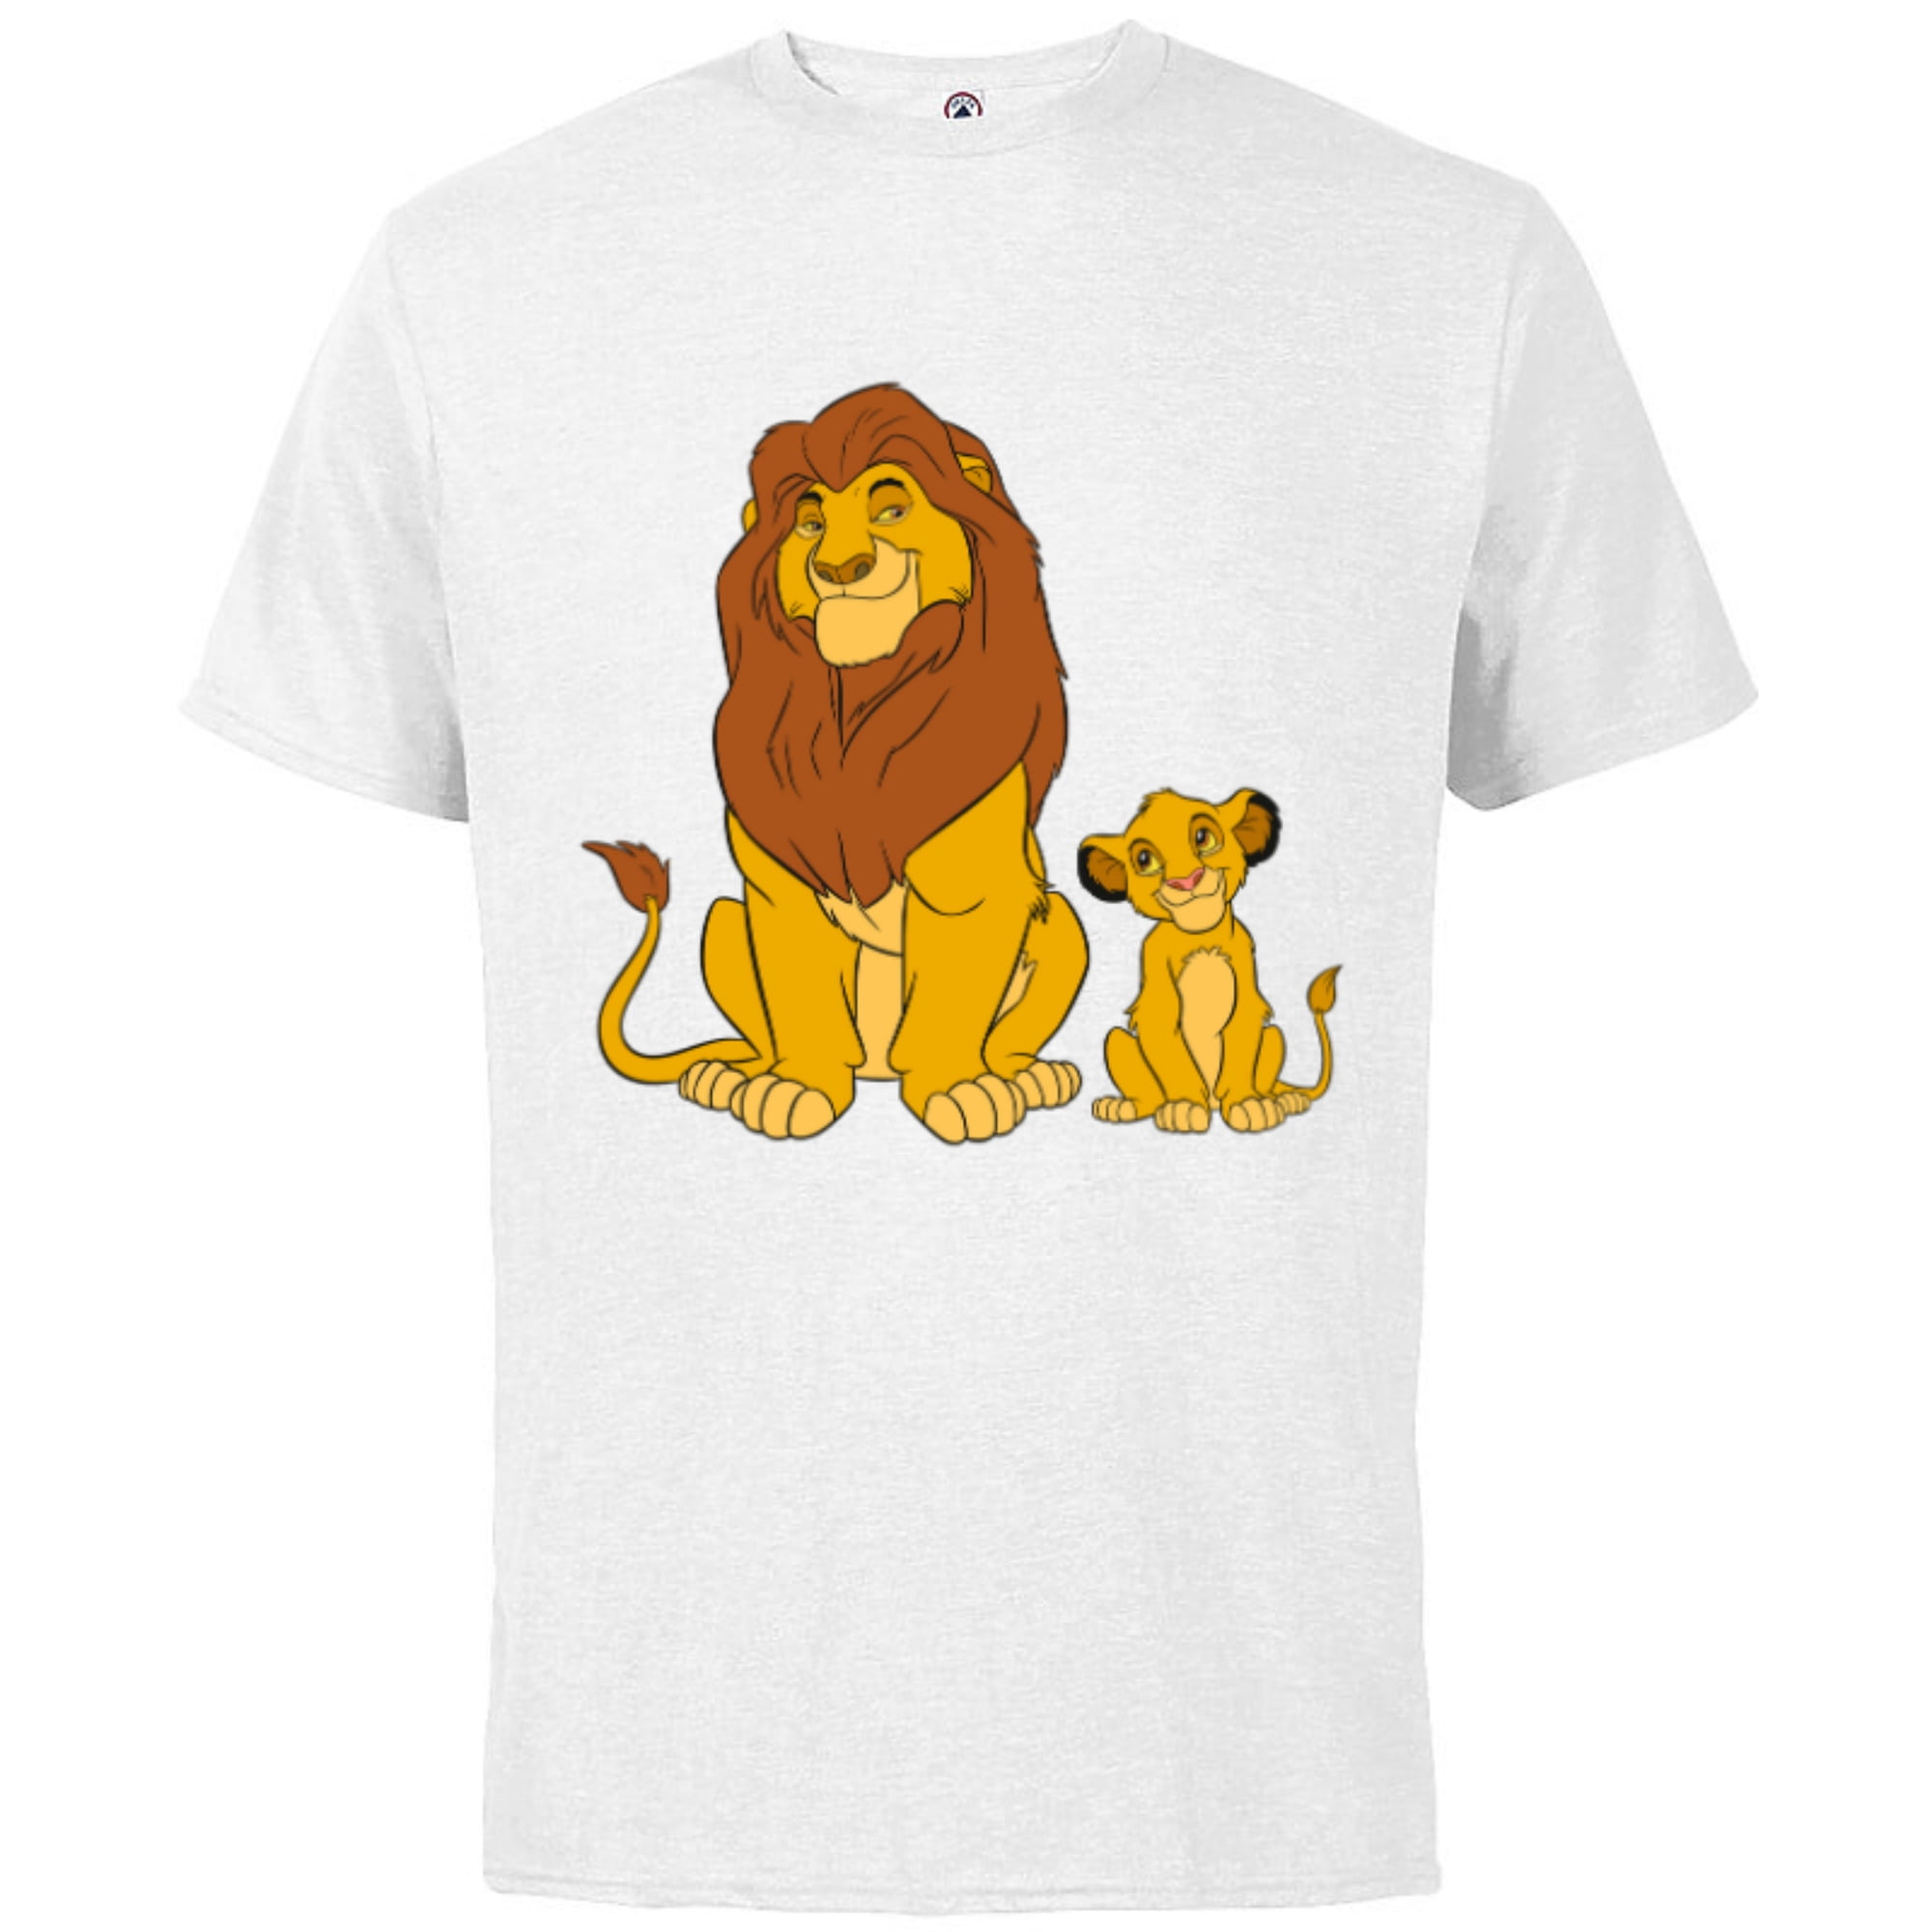 Disney The Lion King Young - and Cotton Heather Adults Sleeve Short T-Shirt for -Customized-Athletic Simba Mufasa